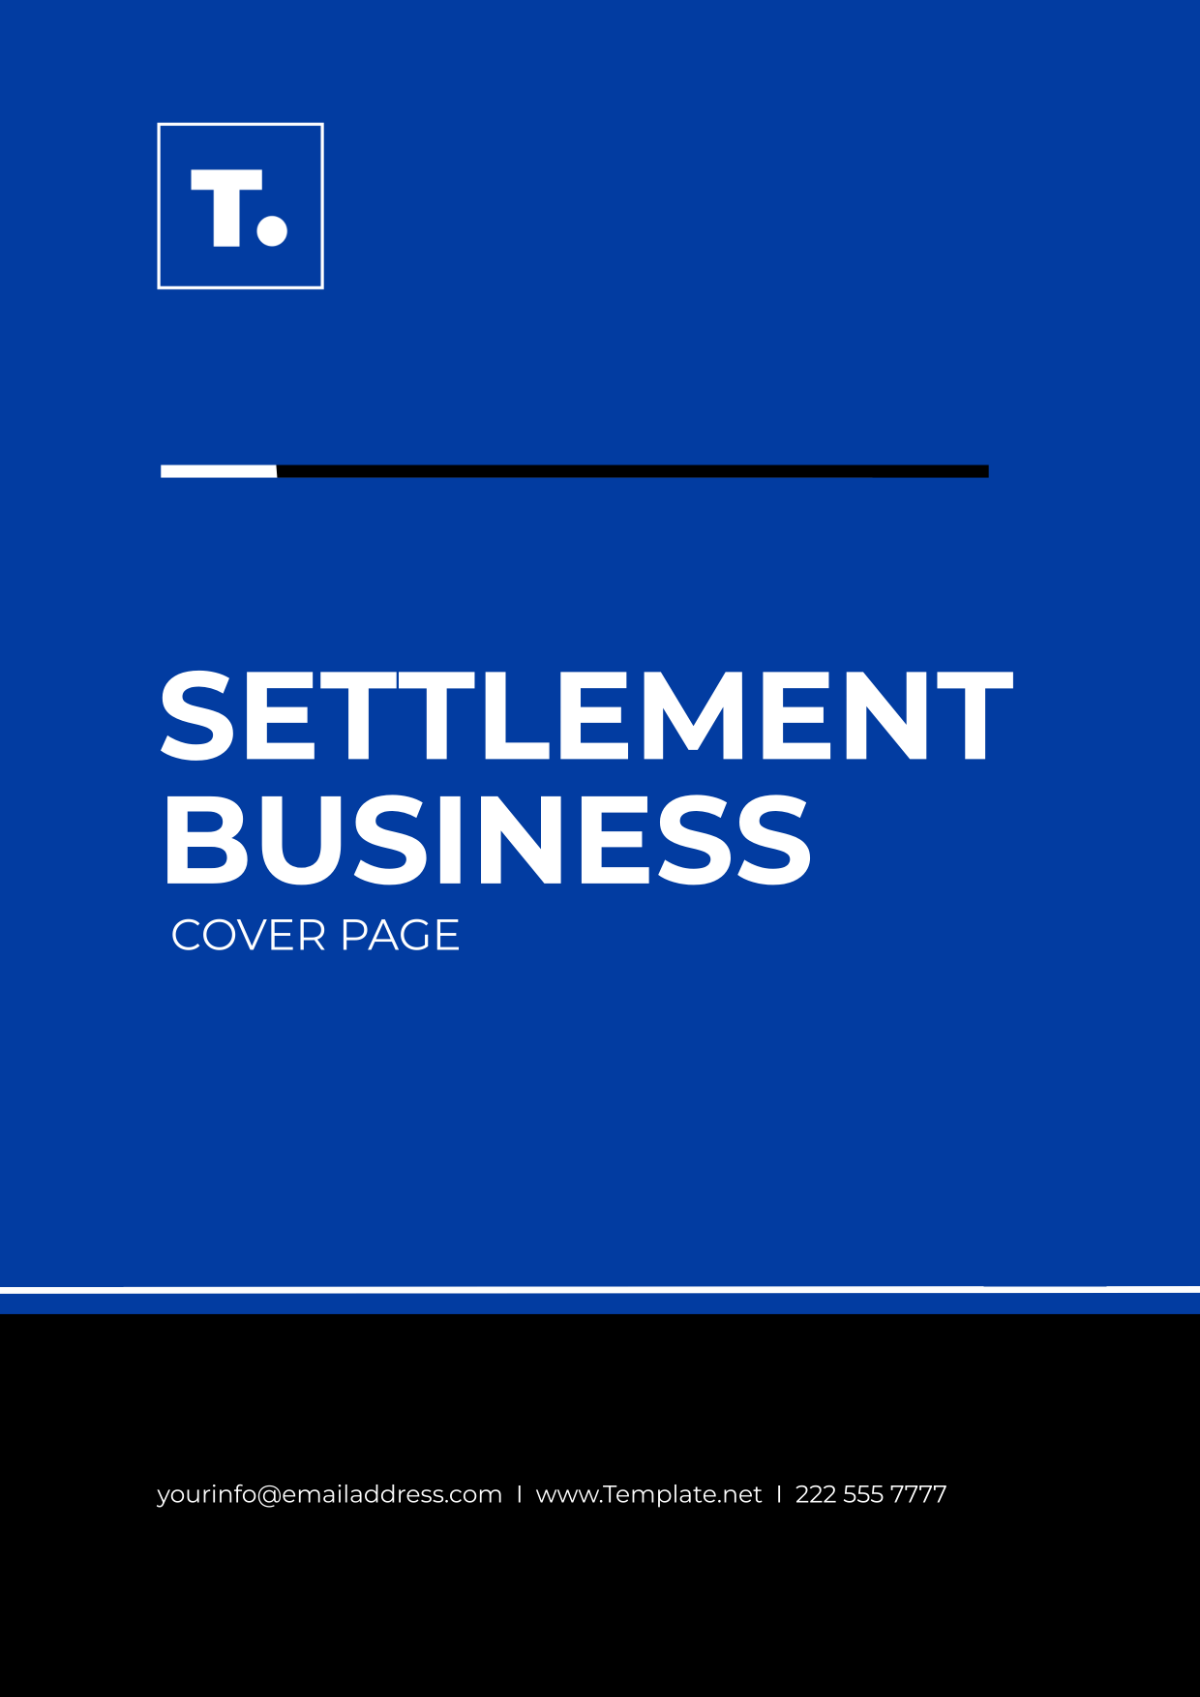 Free Settlement Business Cover Page Template